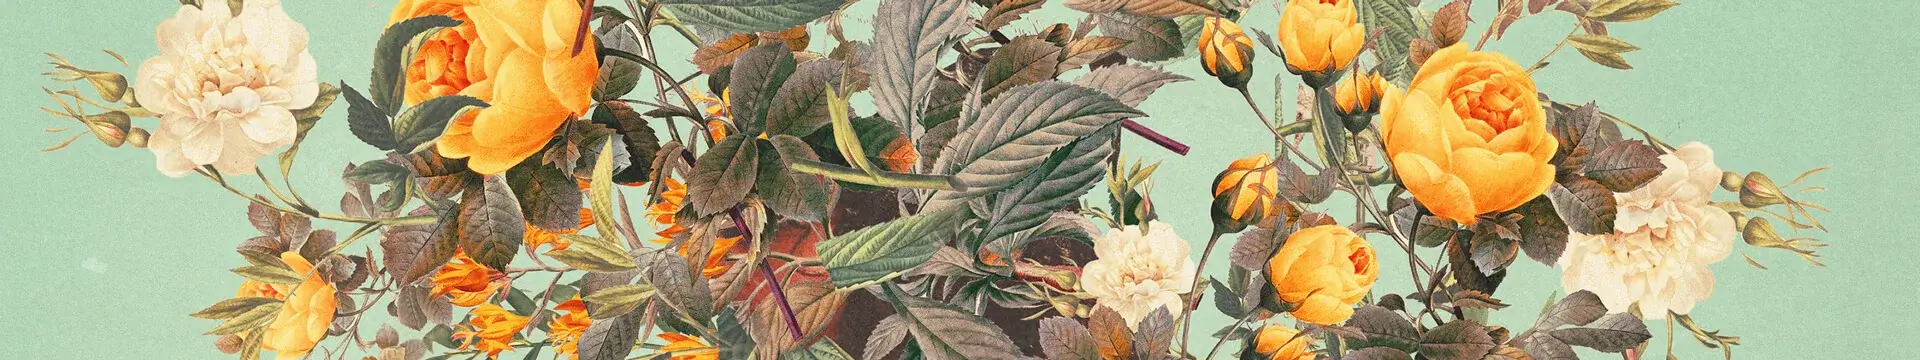 Close up of vintage floral artwork featuring a yellow and white bouquet of roses with lots of deep green leaves on a light sage green background.